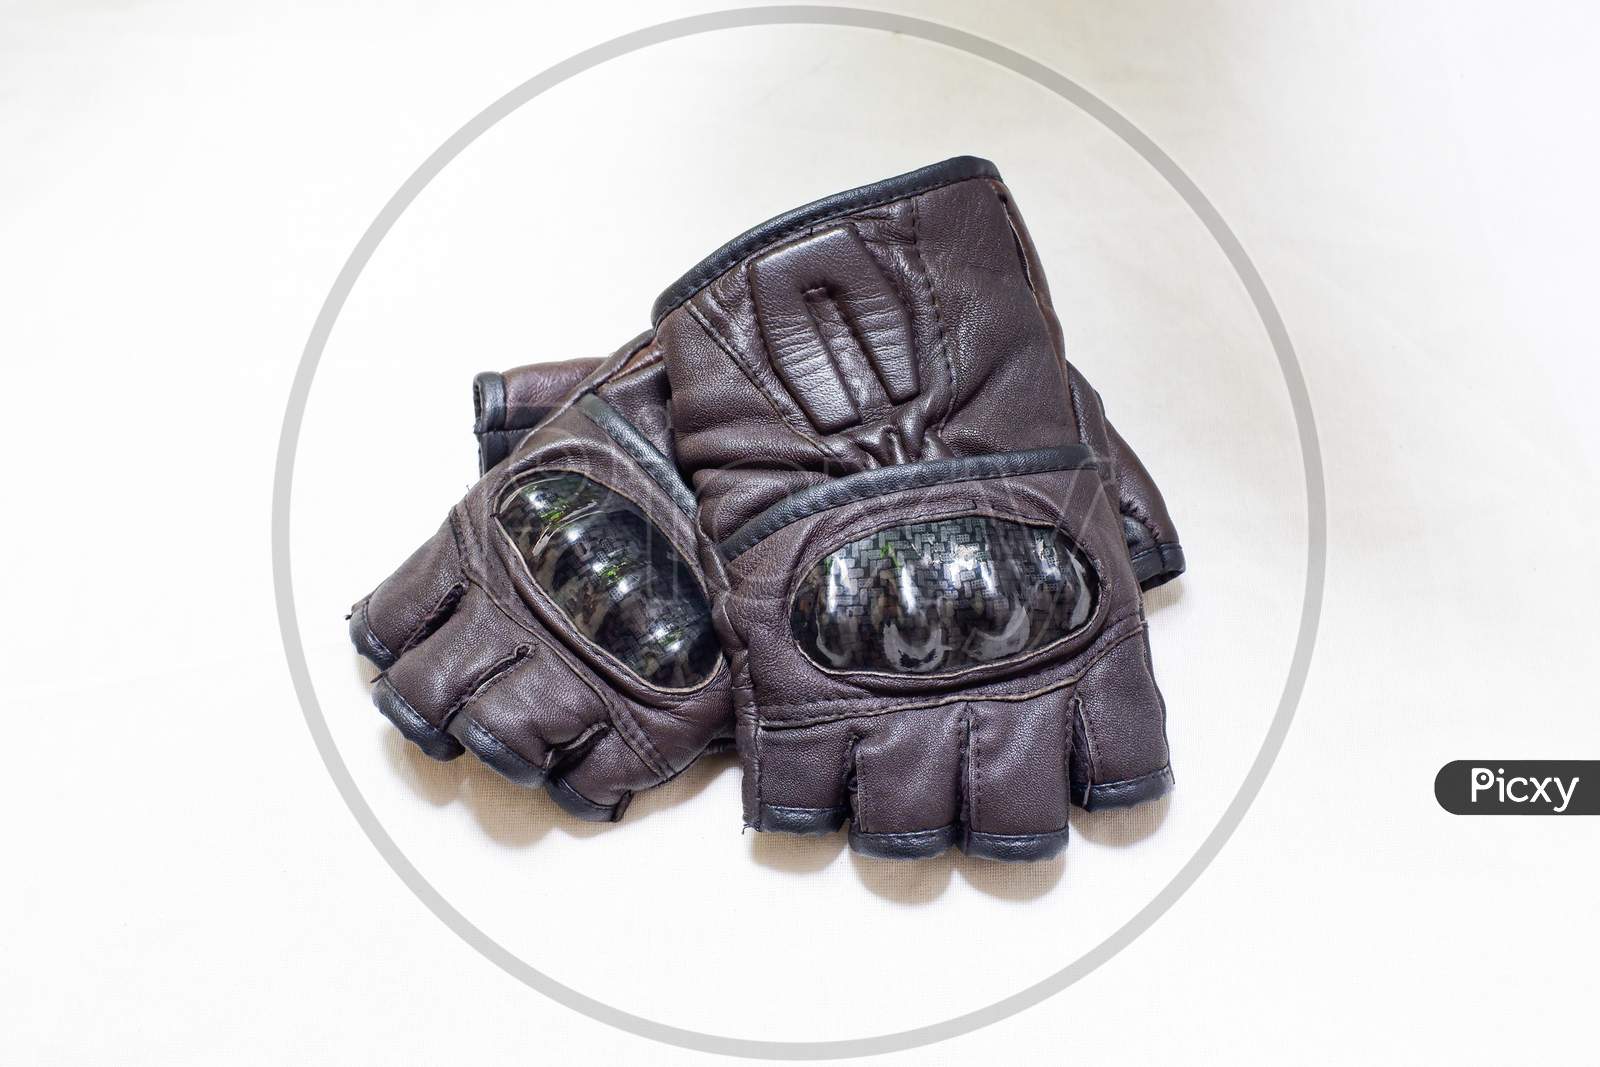 Brown Leather Gloves For Biker With Protection In White Background